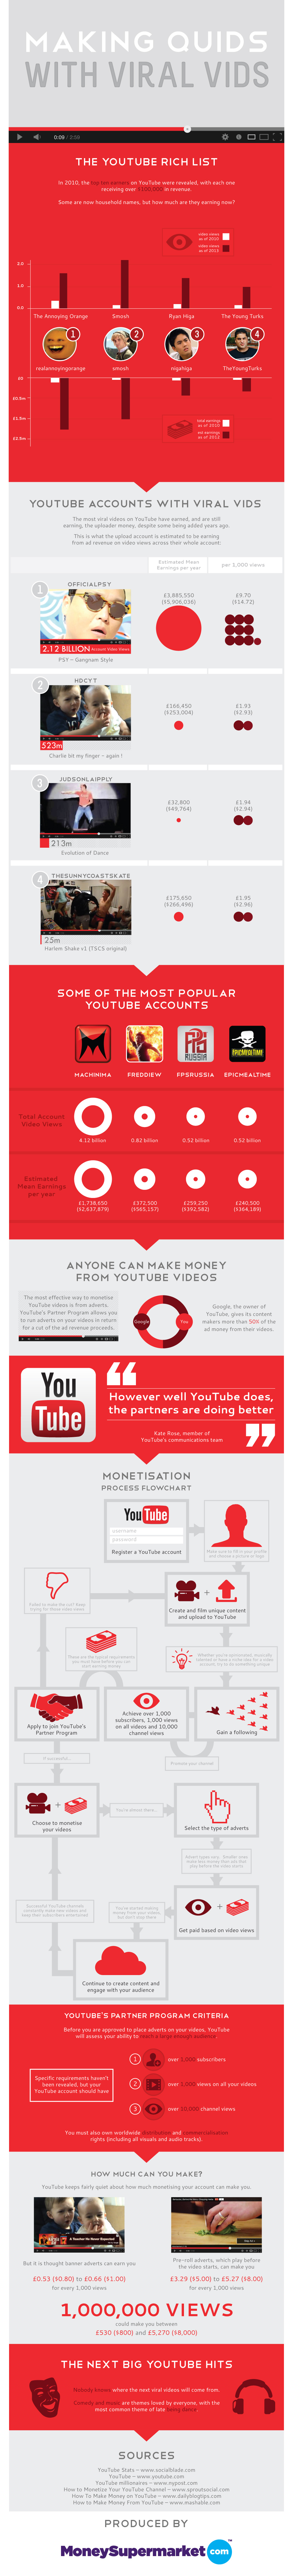 make money with viral videos infographic